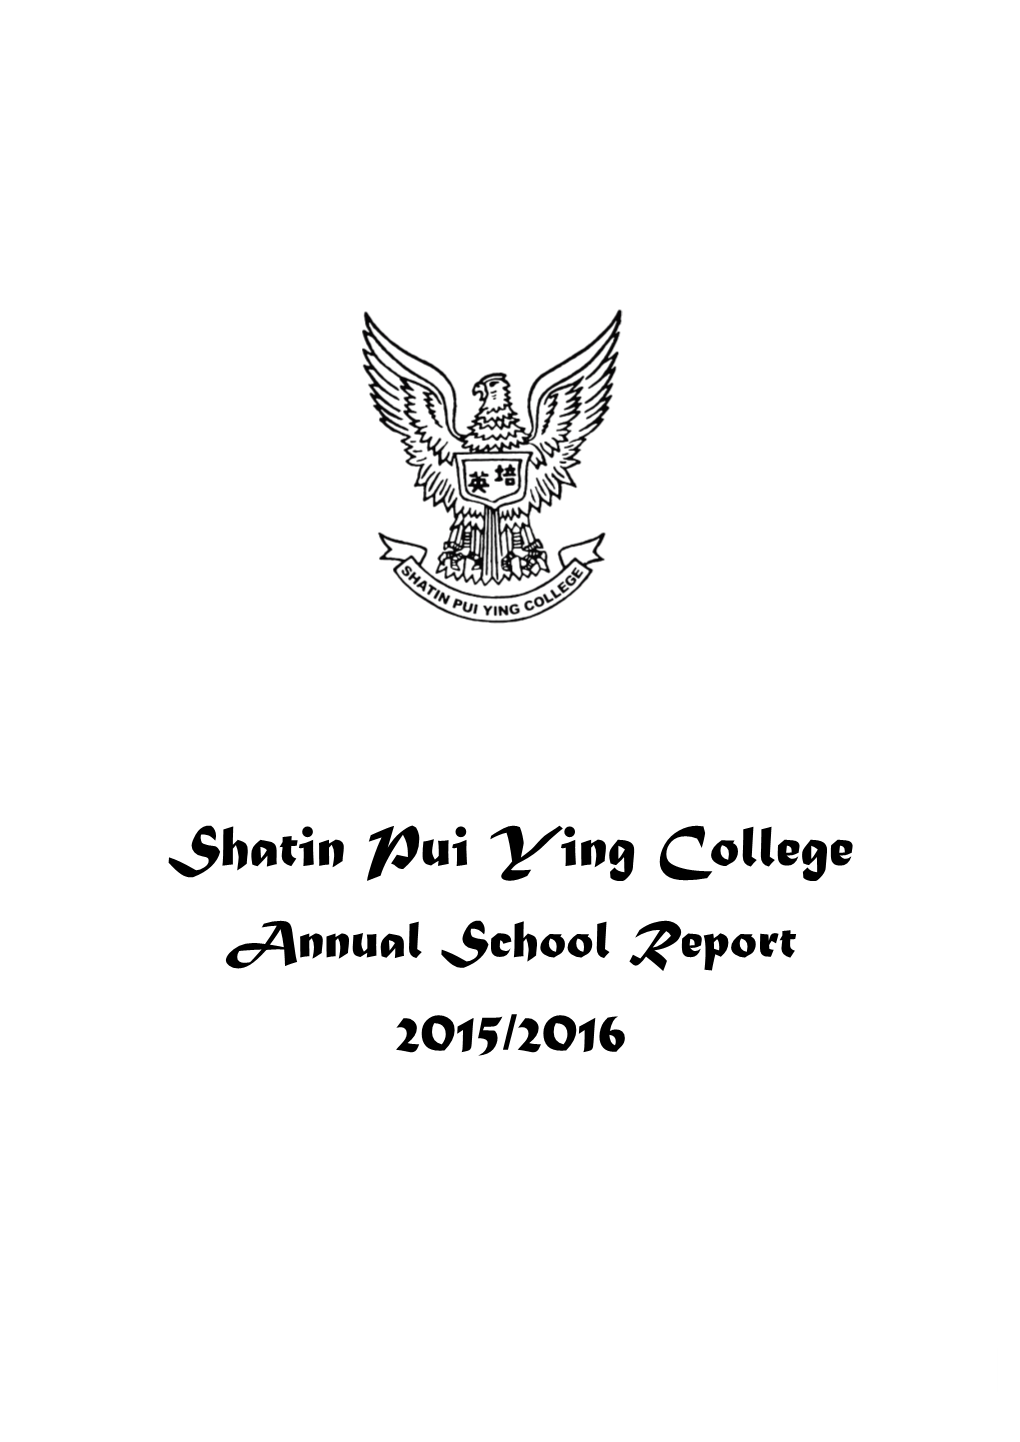 Shatin Pui Ying College Annual School Report 2015/2016